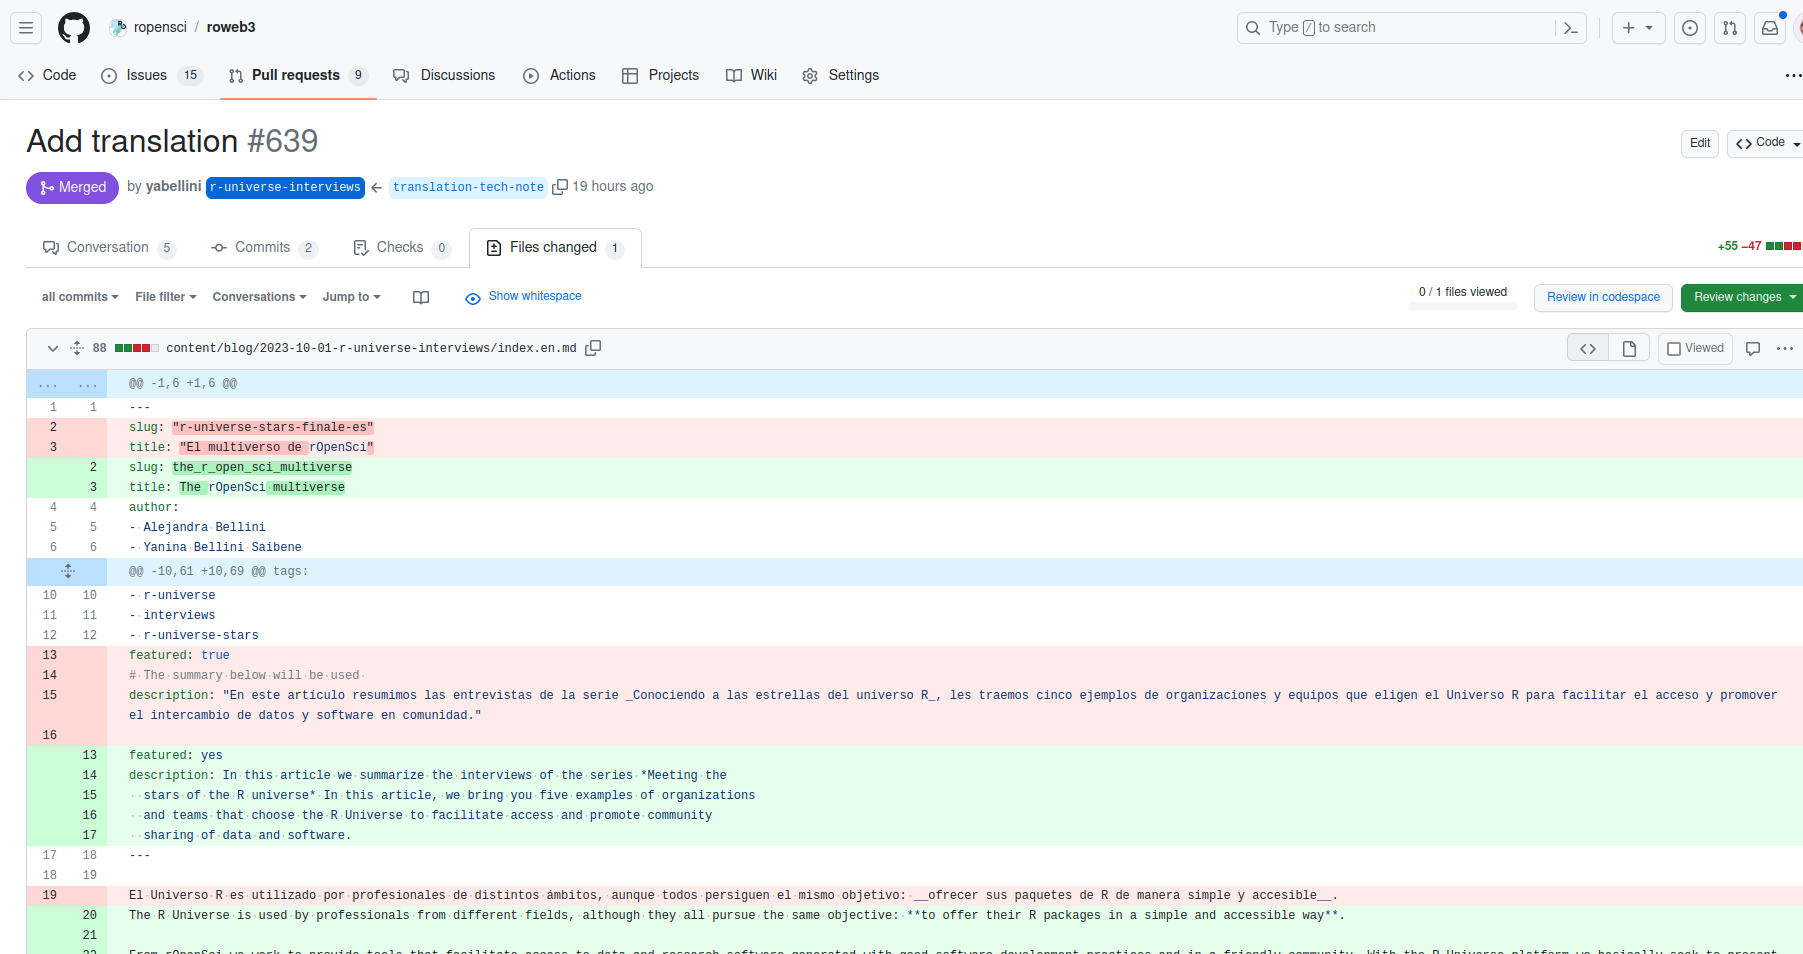 Screenshot of the files tab of the pull request adding the automatic translation, where we observe Spanish text in the YAML metadata and Markdown content has been translated to English.